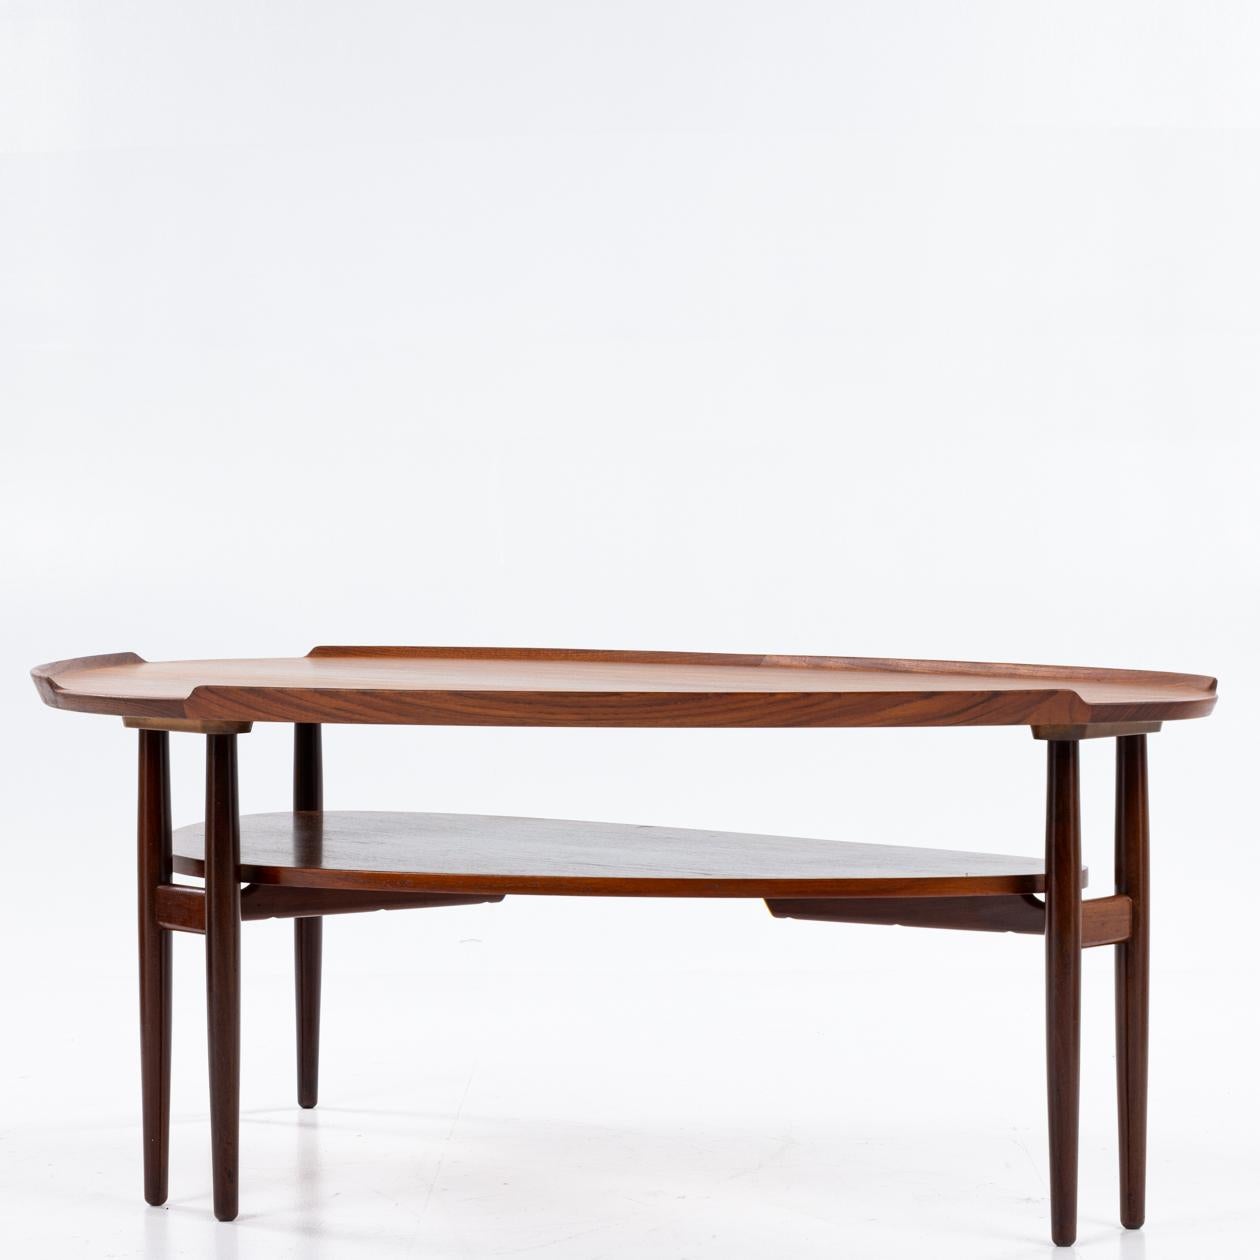 Coffee table with six legs in walnut. By Arne Vodder / Sibast furniture.